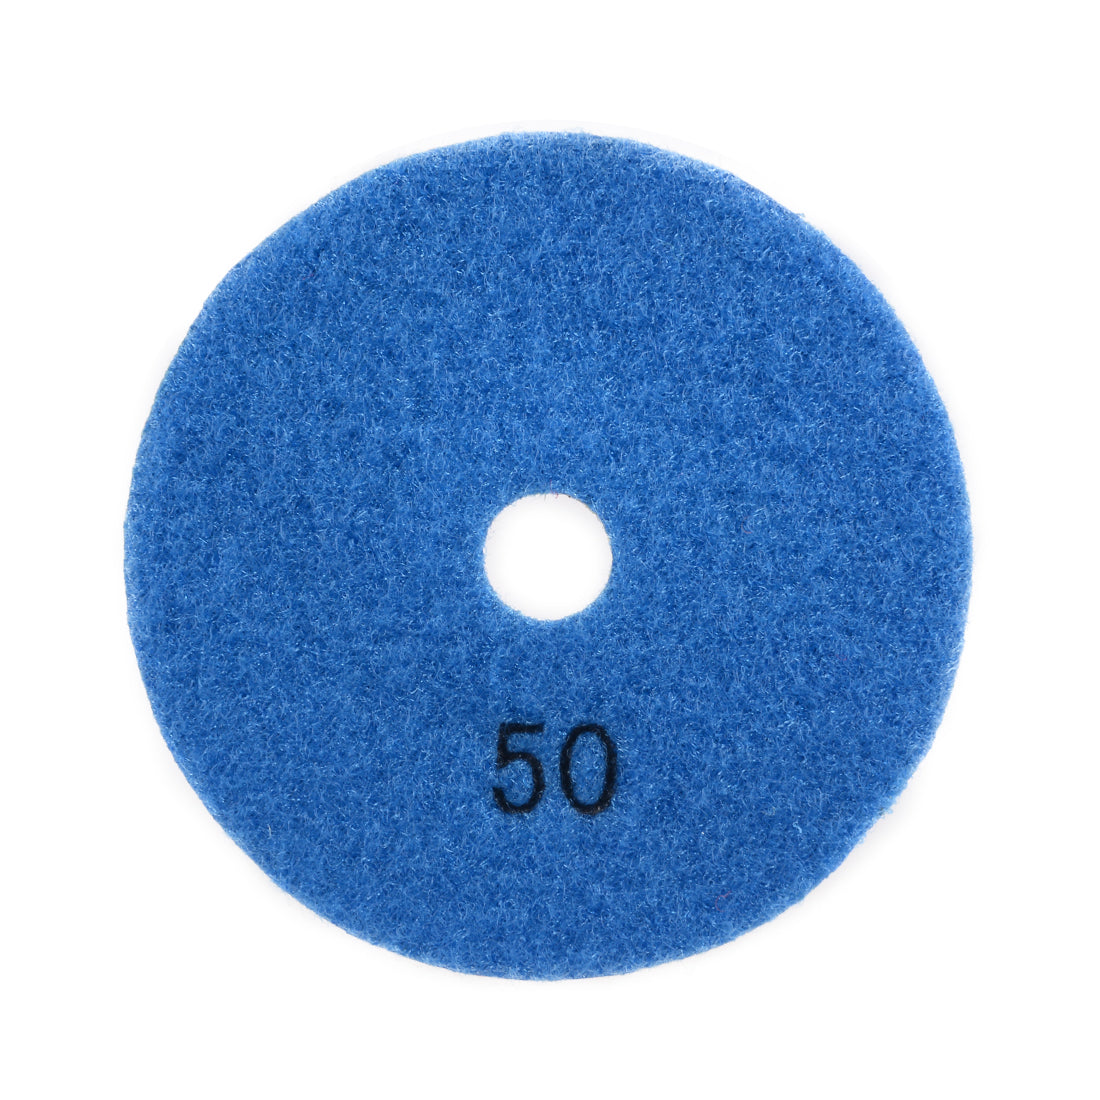 uxcell Uxcell Diamond Polishing Sanding Grinding Pads Discs 4 Inch Grit 50 2 Pcs for Granite Concrete Stone Marble